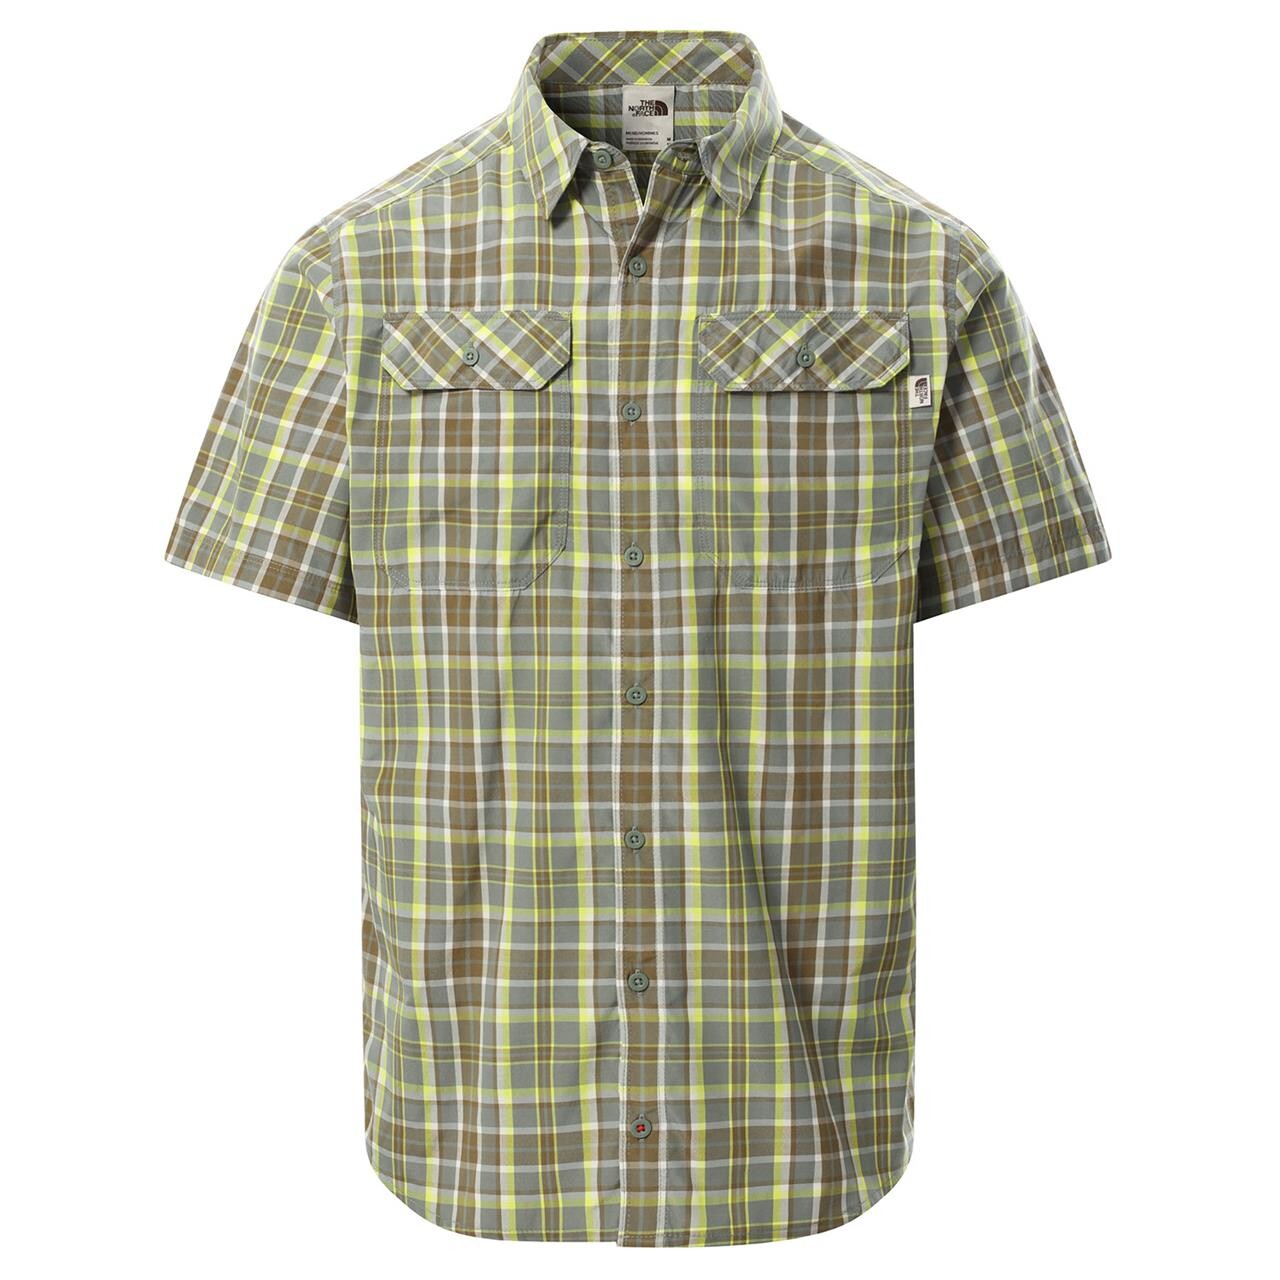 Billede af The North Face Mens S/S Pine Knot Shirt  (Grøn (AGAVE GREEN PLAID) Small)